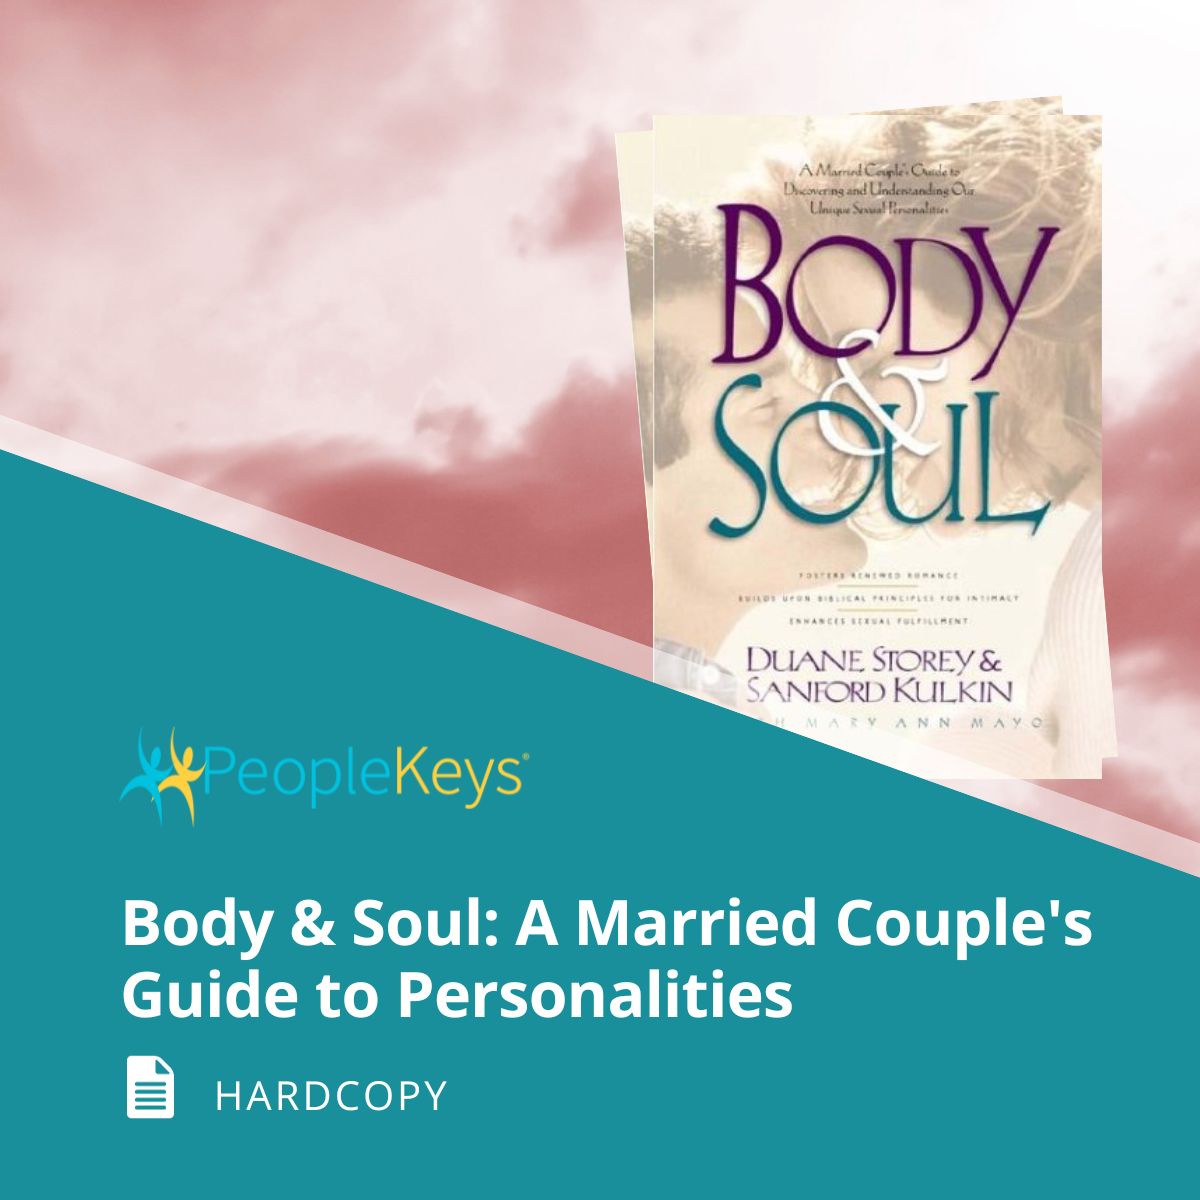 Body & Soul: A Married Couple's Guide to Personalities (Hardcopy)